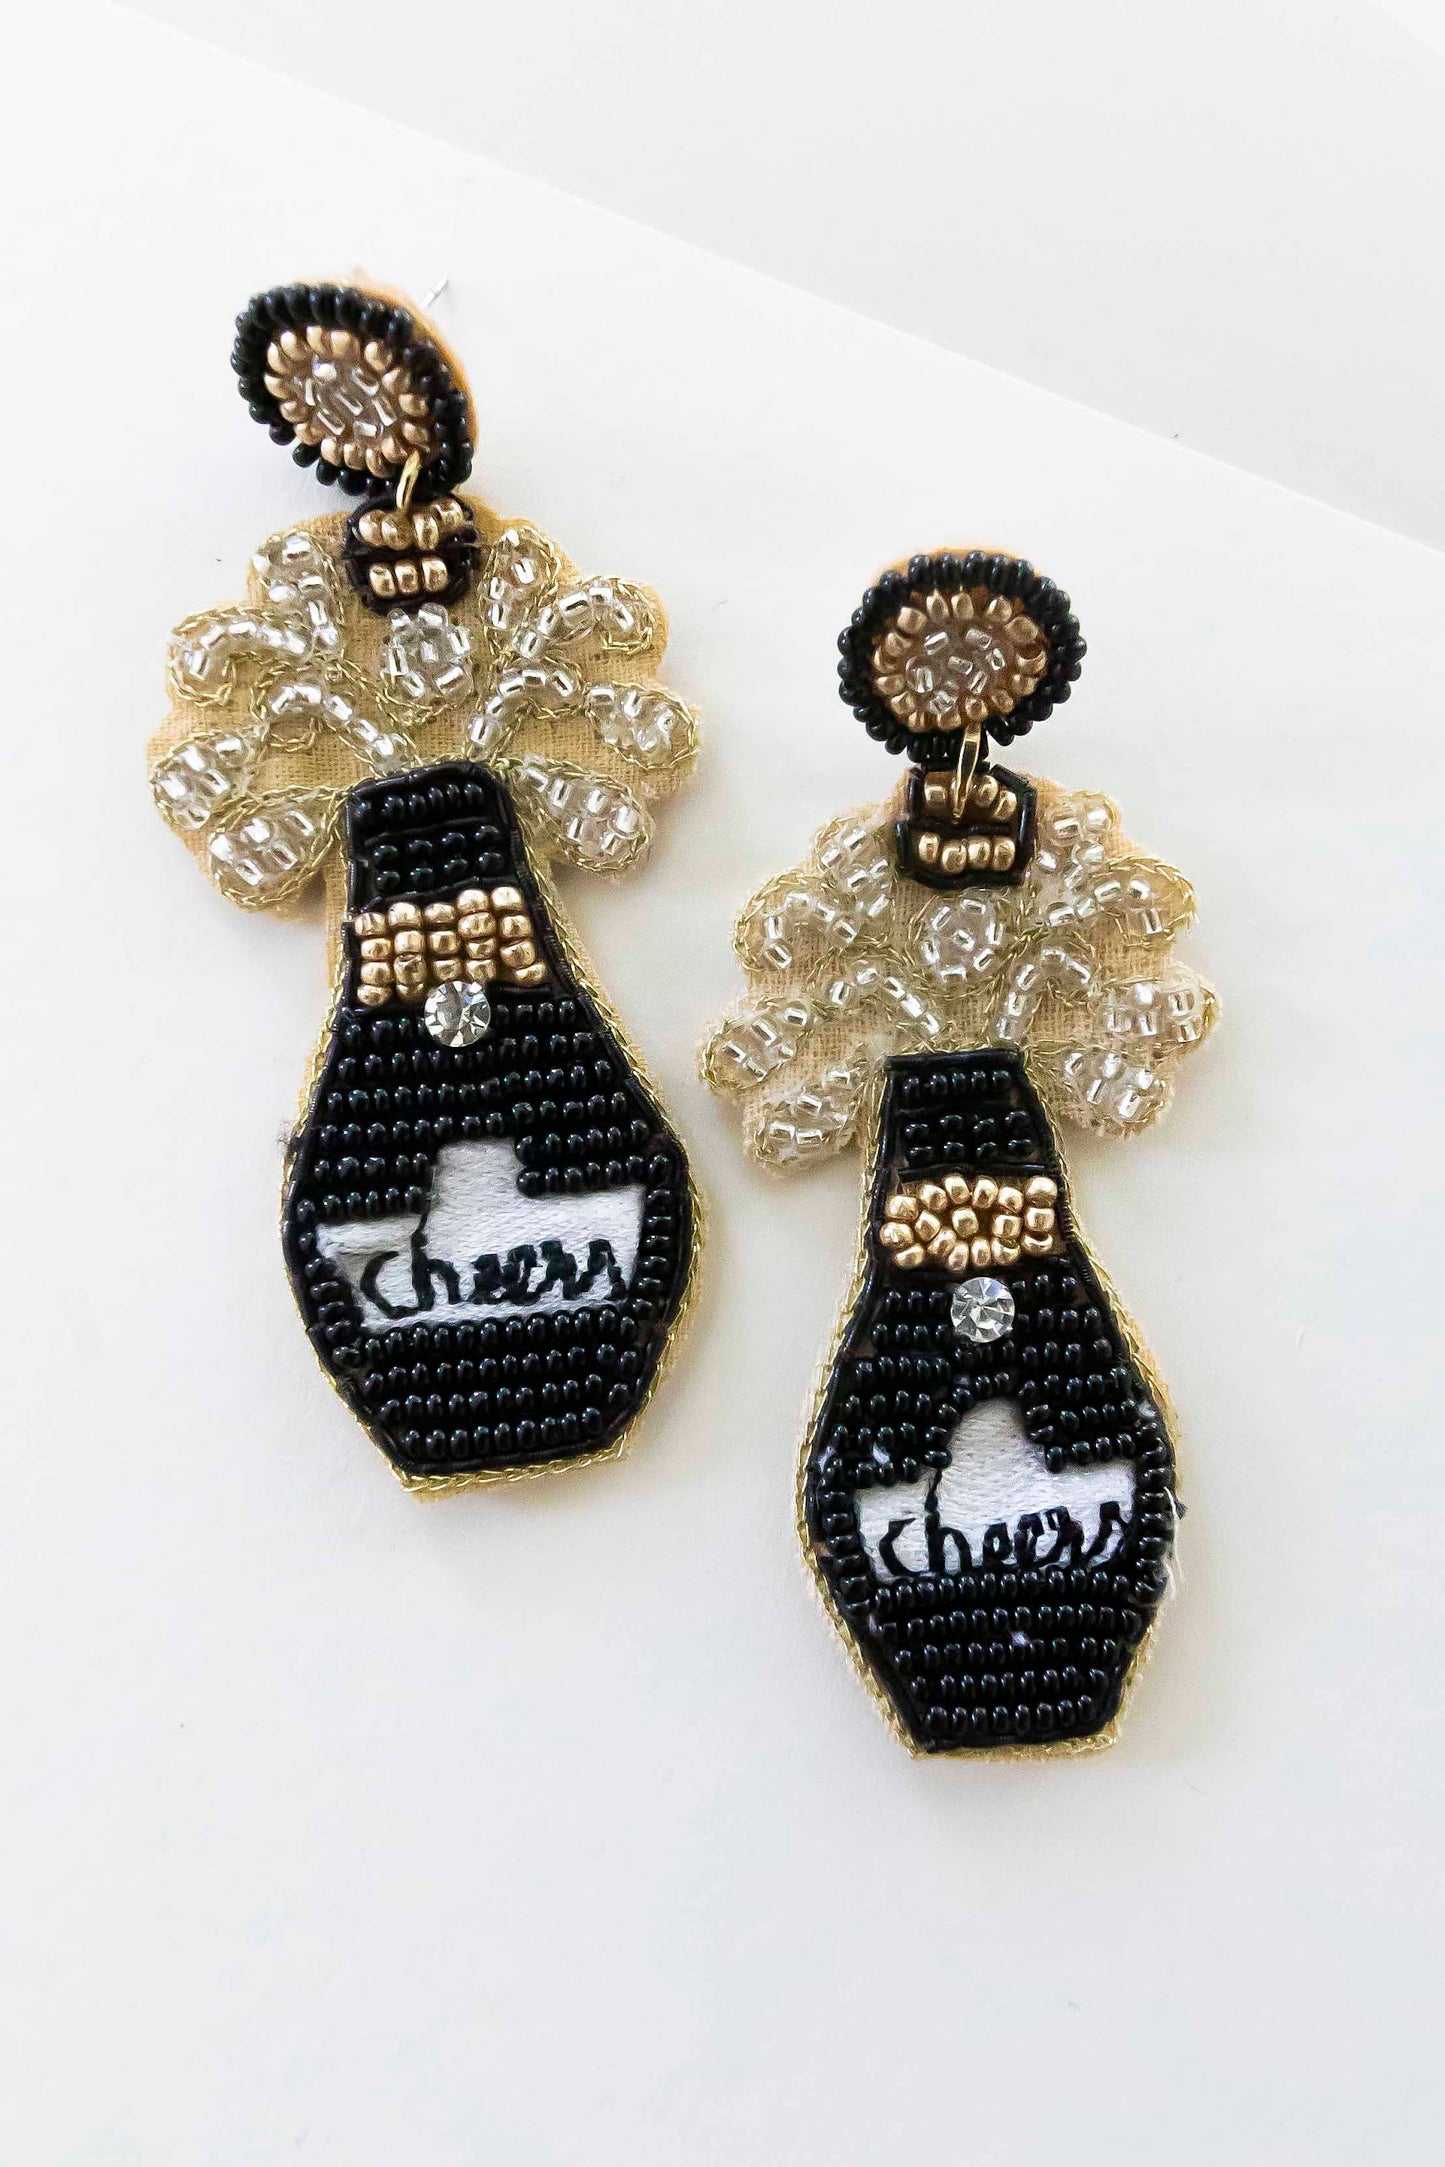 Load image into Gallery viewer, Cheers Black Champagne Earrings | Hand Beaded Party Earrings | Handmade New Years Earrings | Dainty Black and Gold Beads with Embroidery Detail
